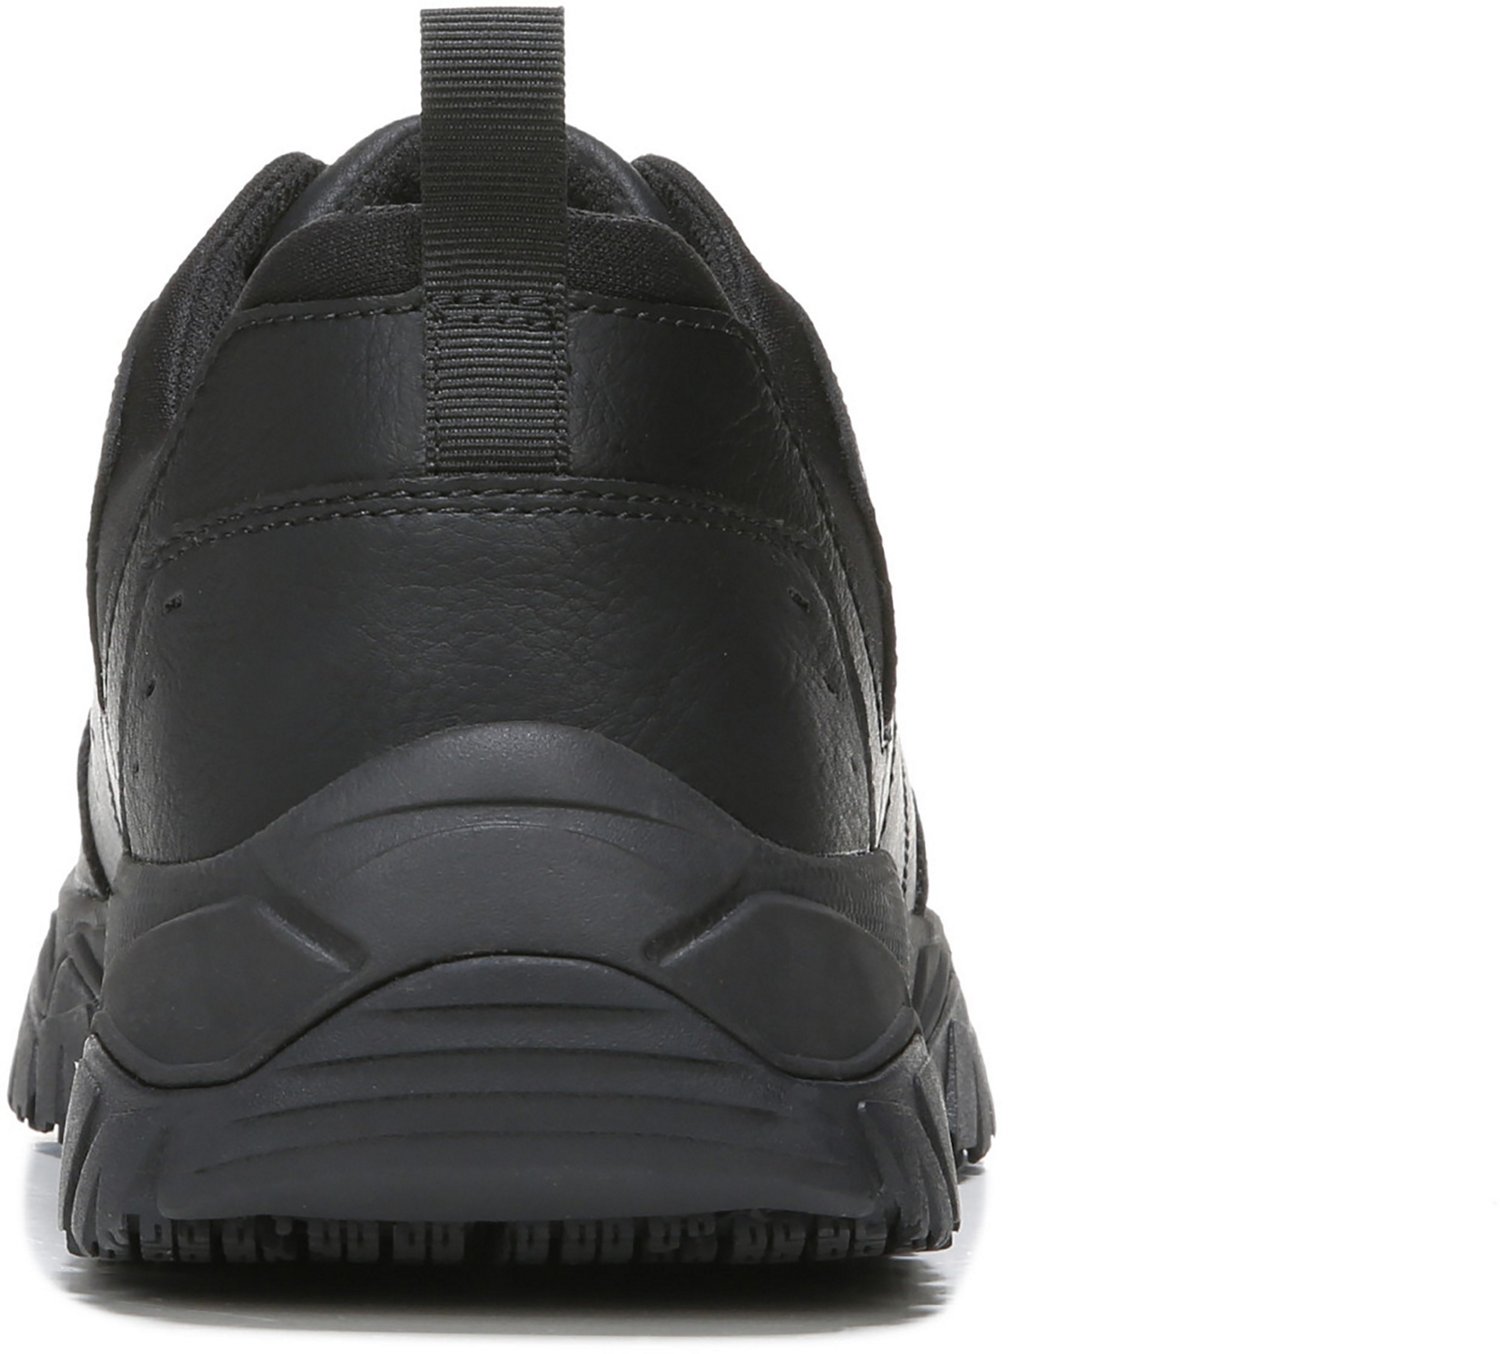 Dr. Scholl's Men's Bravery Slip-On Work Shoes | Academy